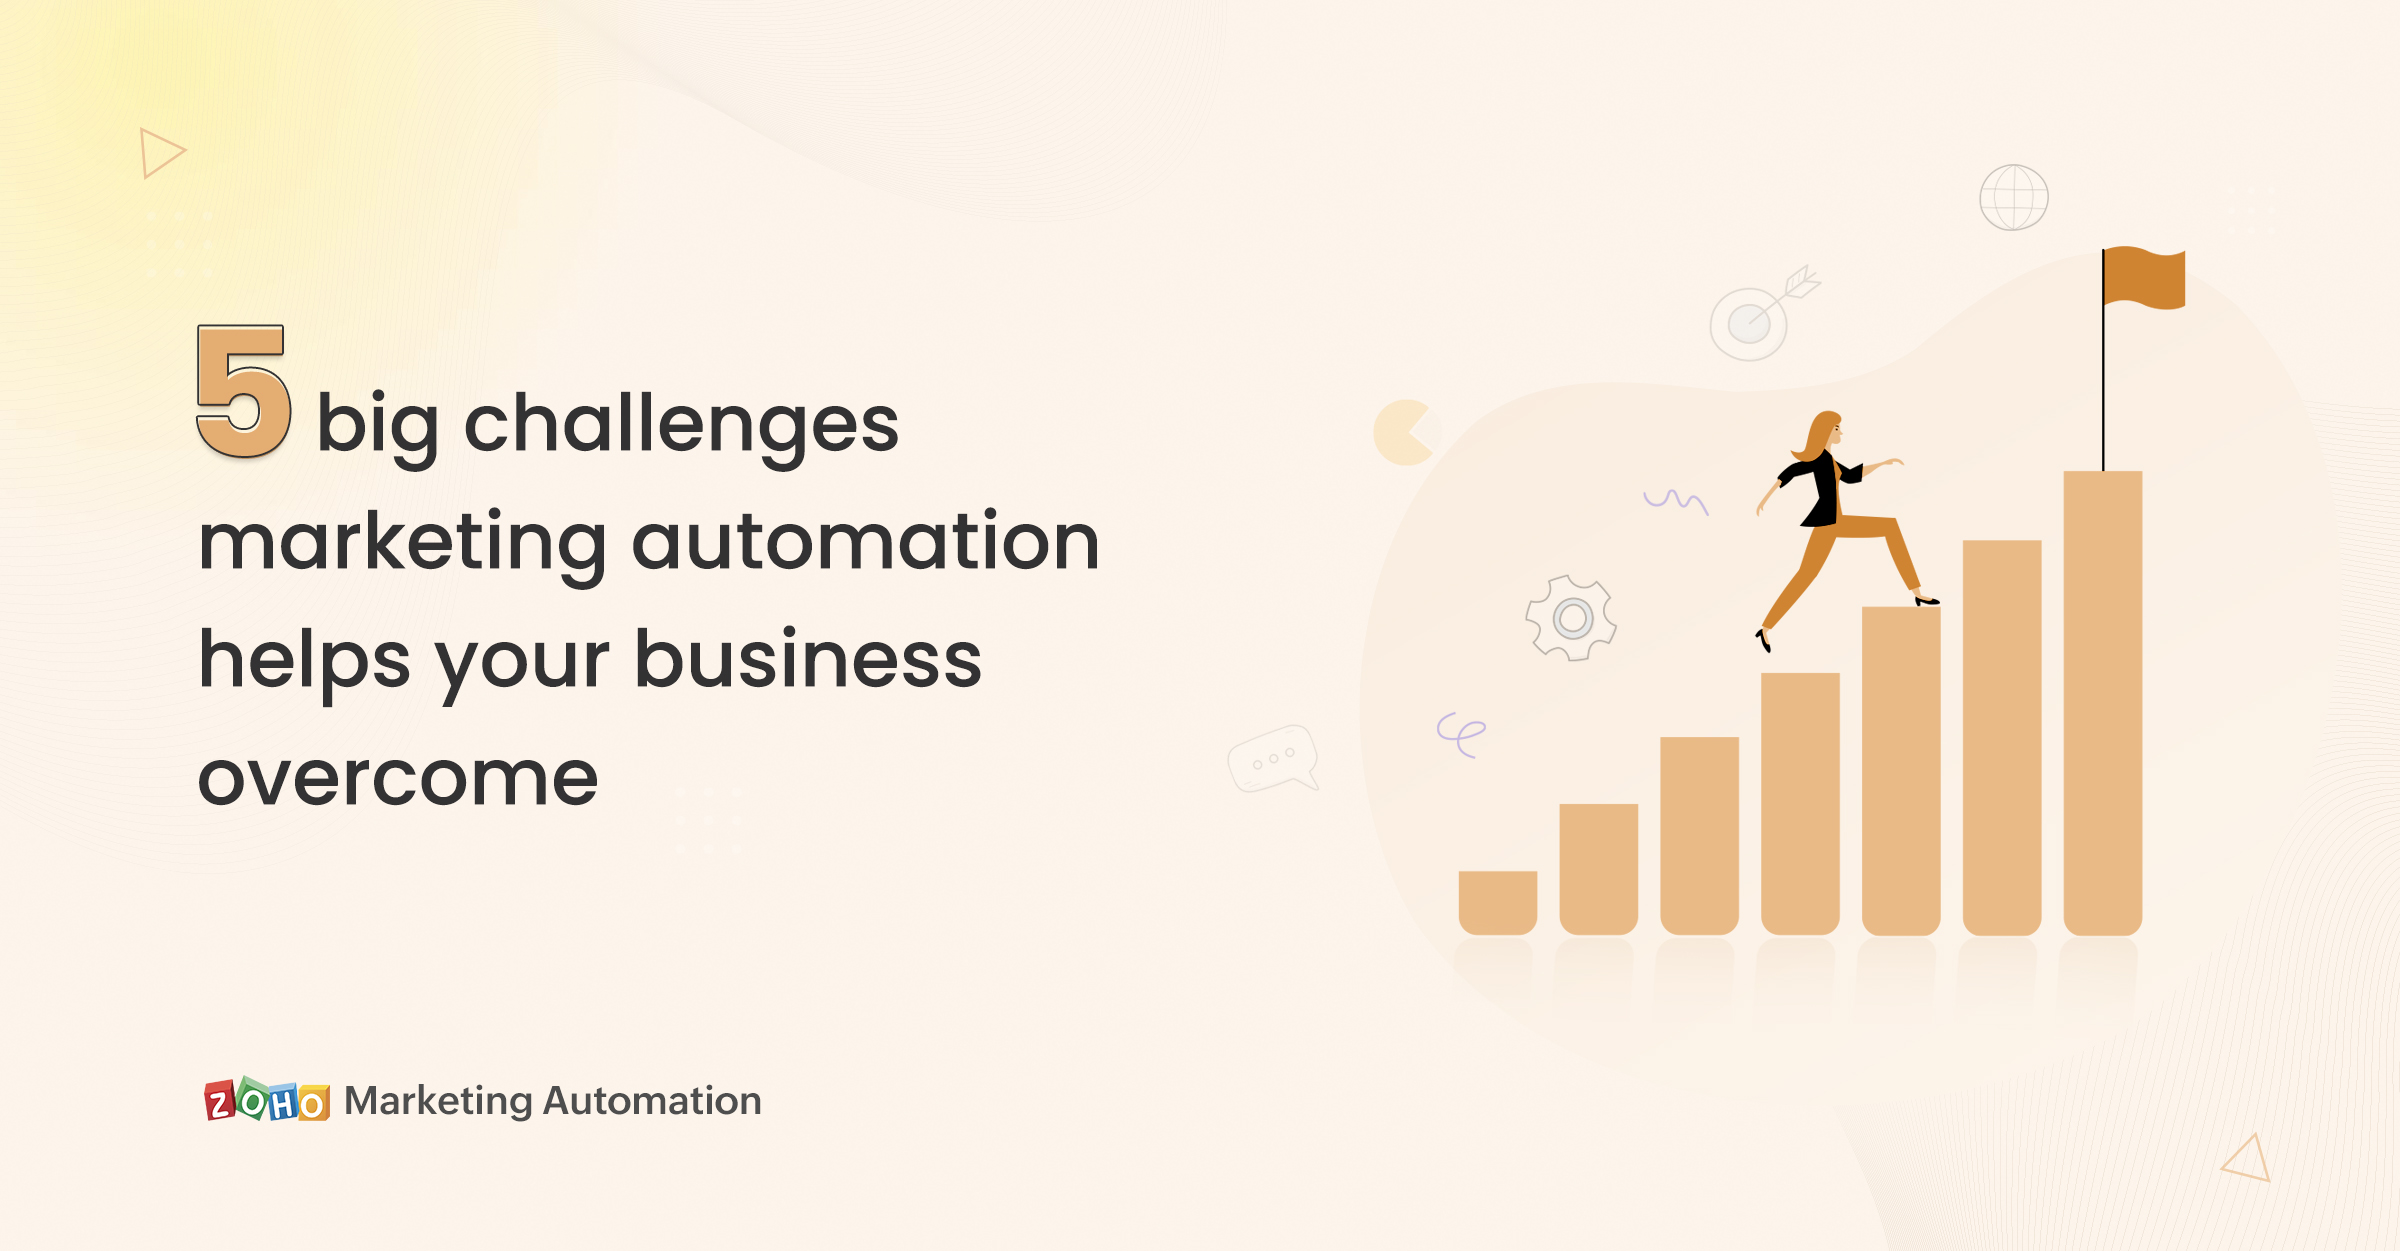 Challenges marketing automation can solve